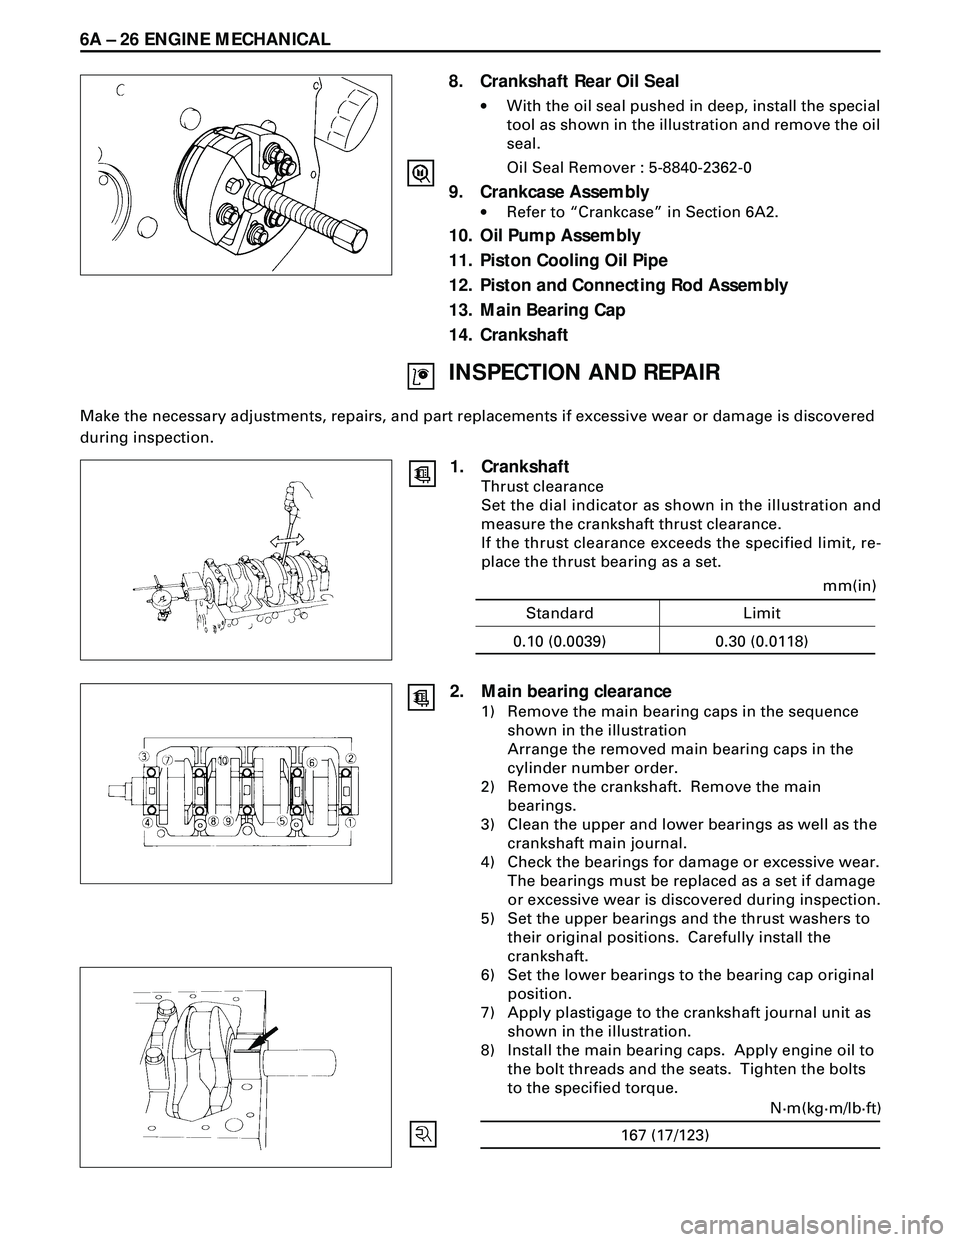 ISUZU TROOPER 1998  Service Repair Manual 6A Ð 26 ENGINE MECHANICAL
8. Crankshaft Rear Oil Seal
·With the oil seal pushed in deep, install the special
tool as shown in the illustration and remove the oil
seal.
Oil Seal Remover : 5-8840-2362